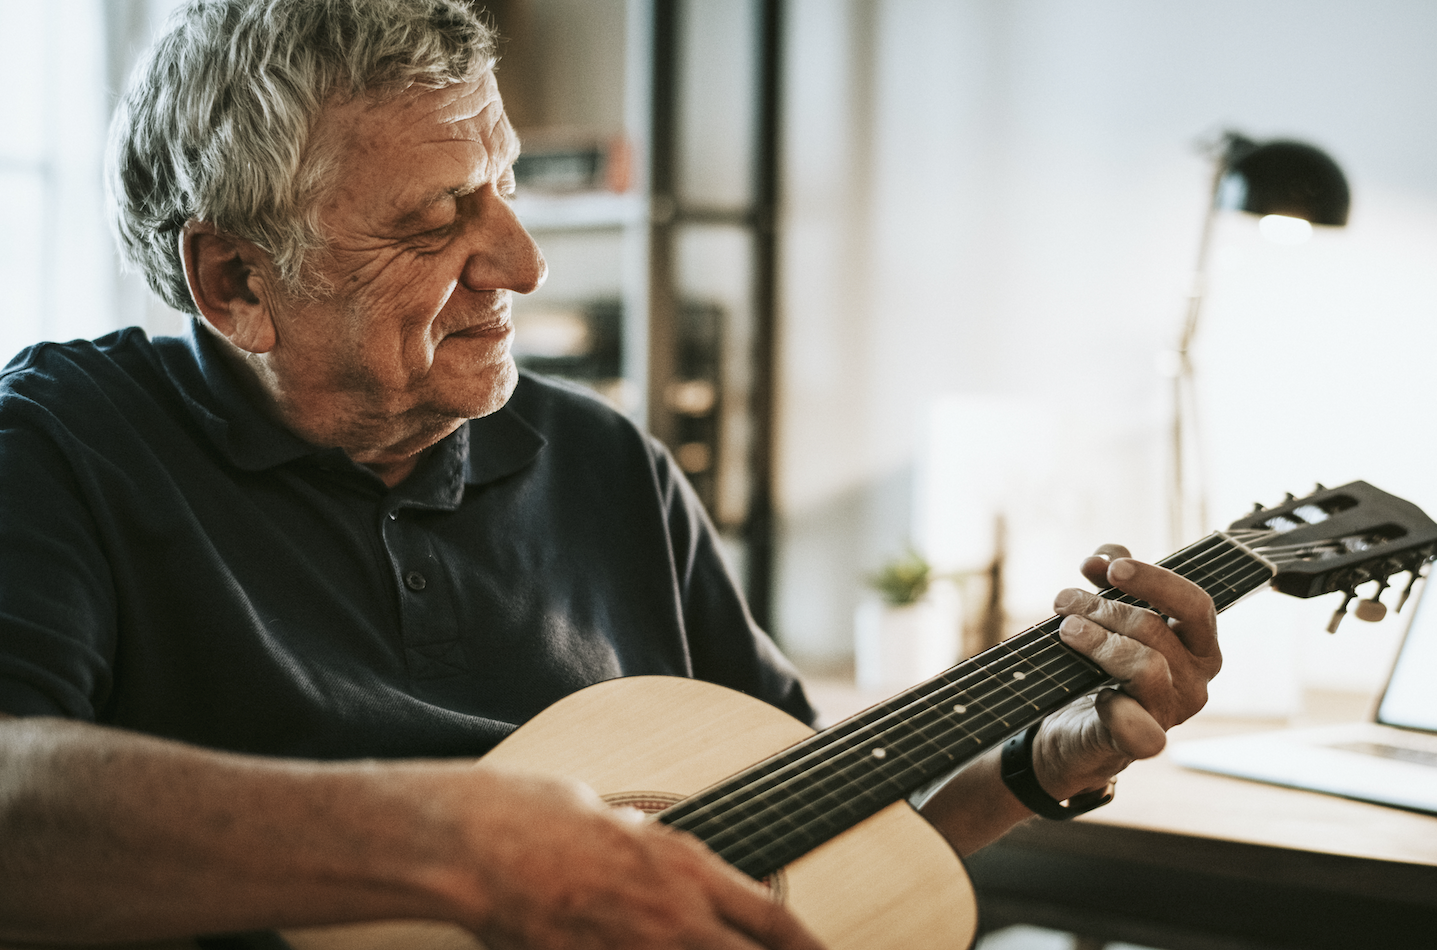 5 Reasons Why Playing an Instrument as an Adult Can Make You Happier and Healthier 